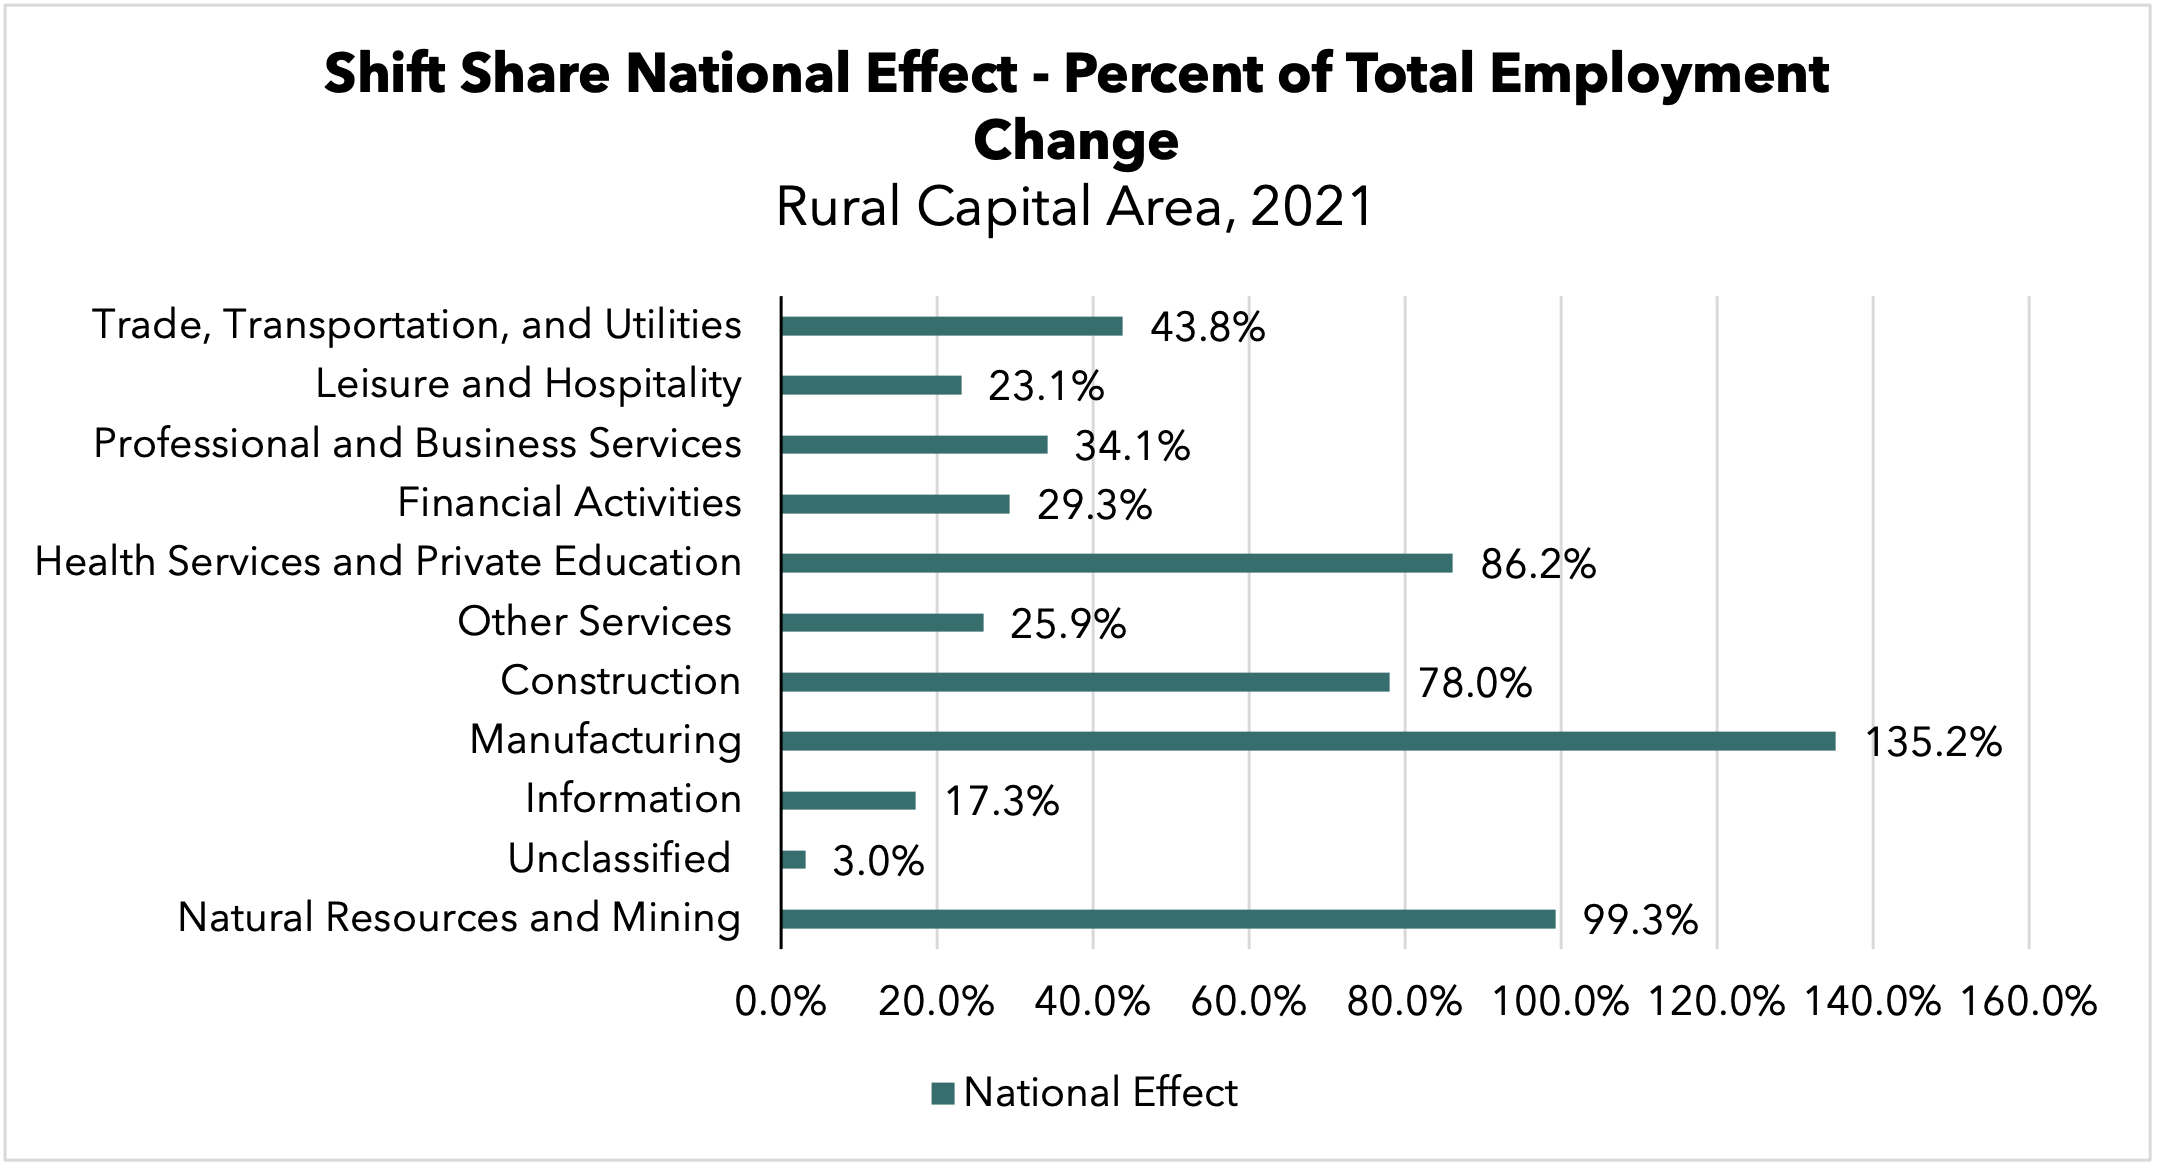 Rural Capital Area Shift Share National Effect 2021